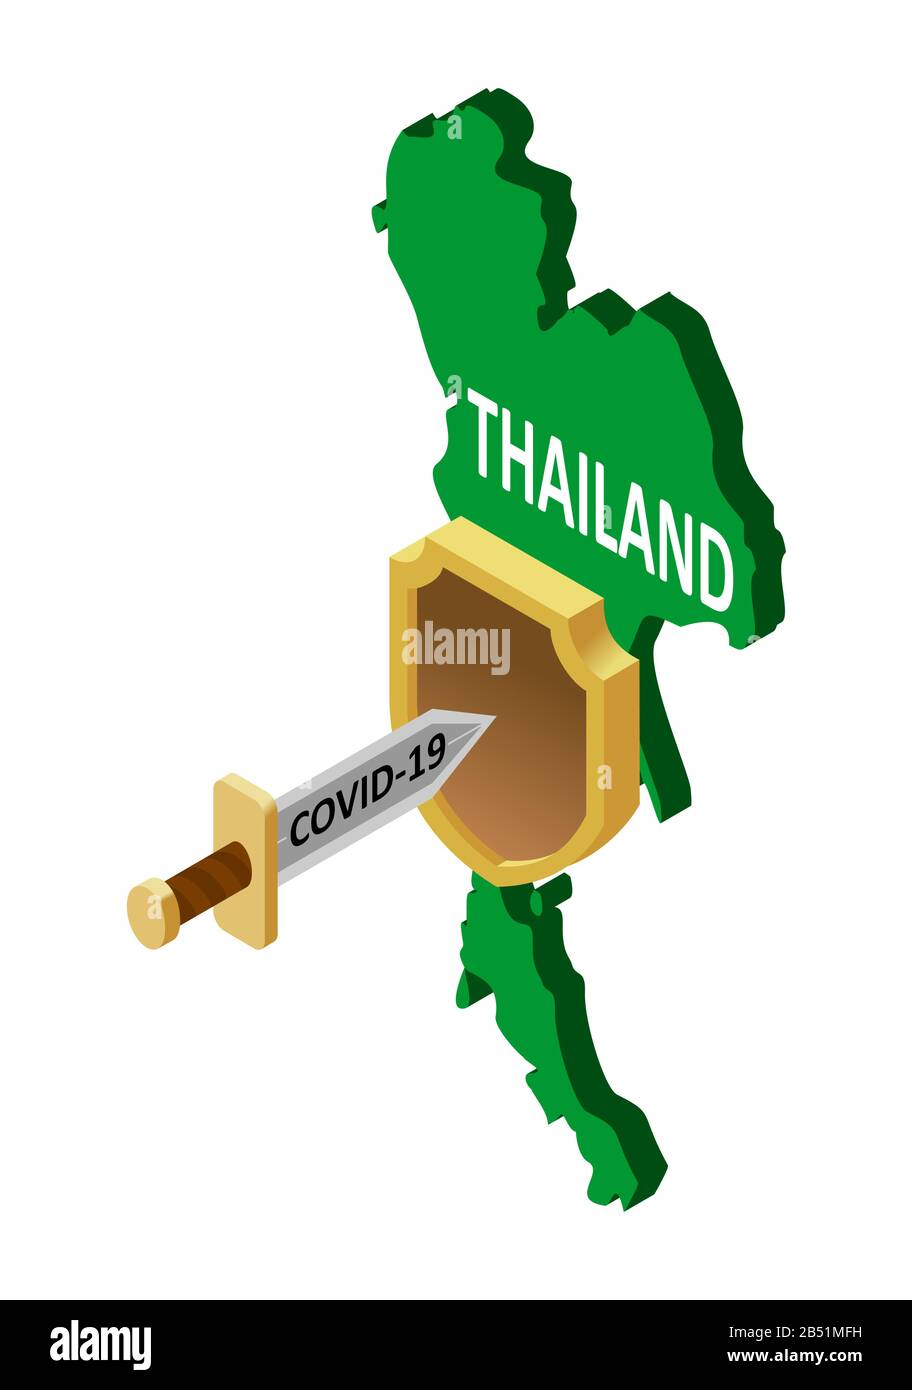 protection of Thailand against coronavirus COVID-19. A sword-shaped coronavirus attacks a shield country in Thailand. Vector isometric land of Thailan Stock Vector